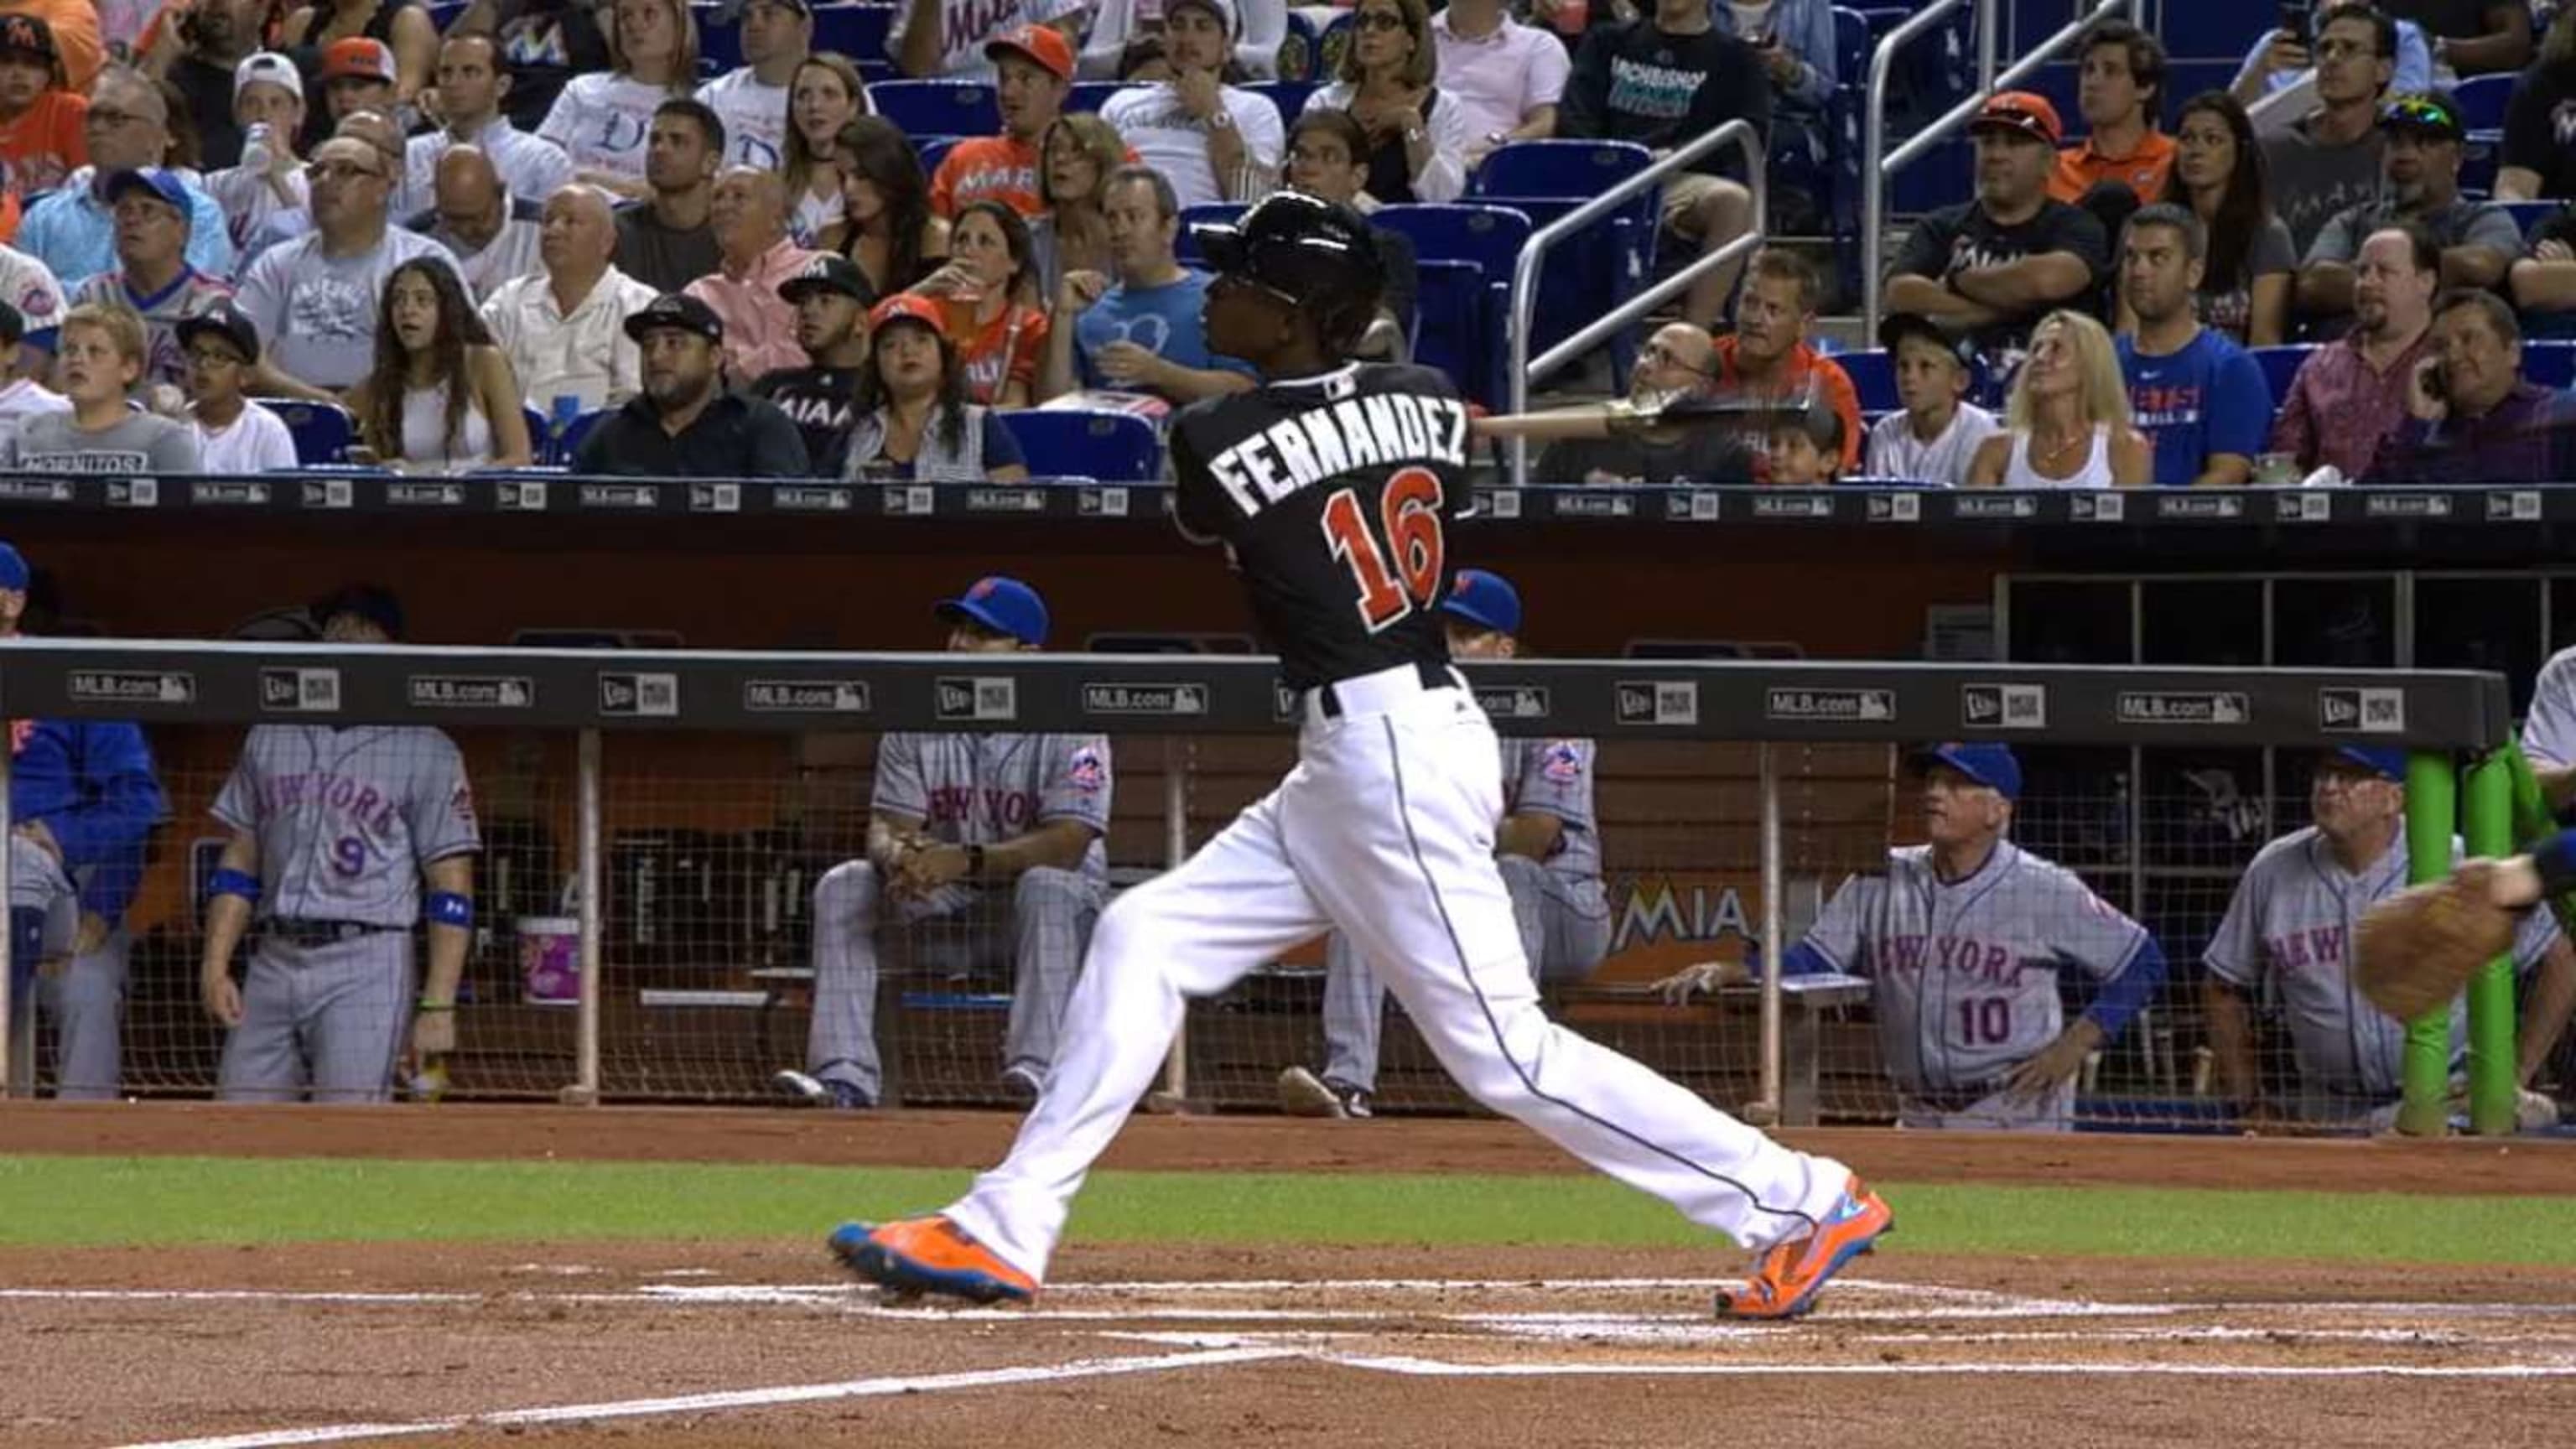 This day in sports history: Marlins' Dee Gordon homers for Jose